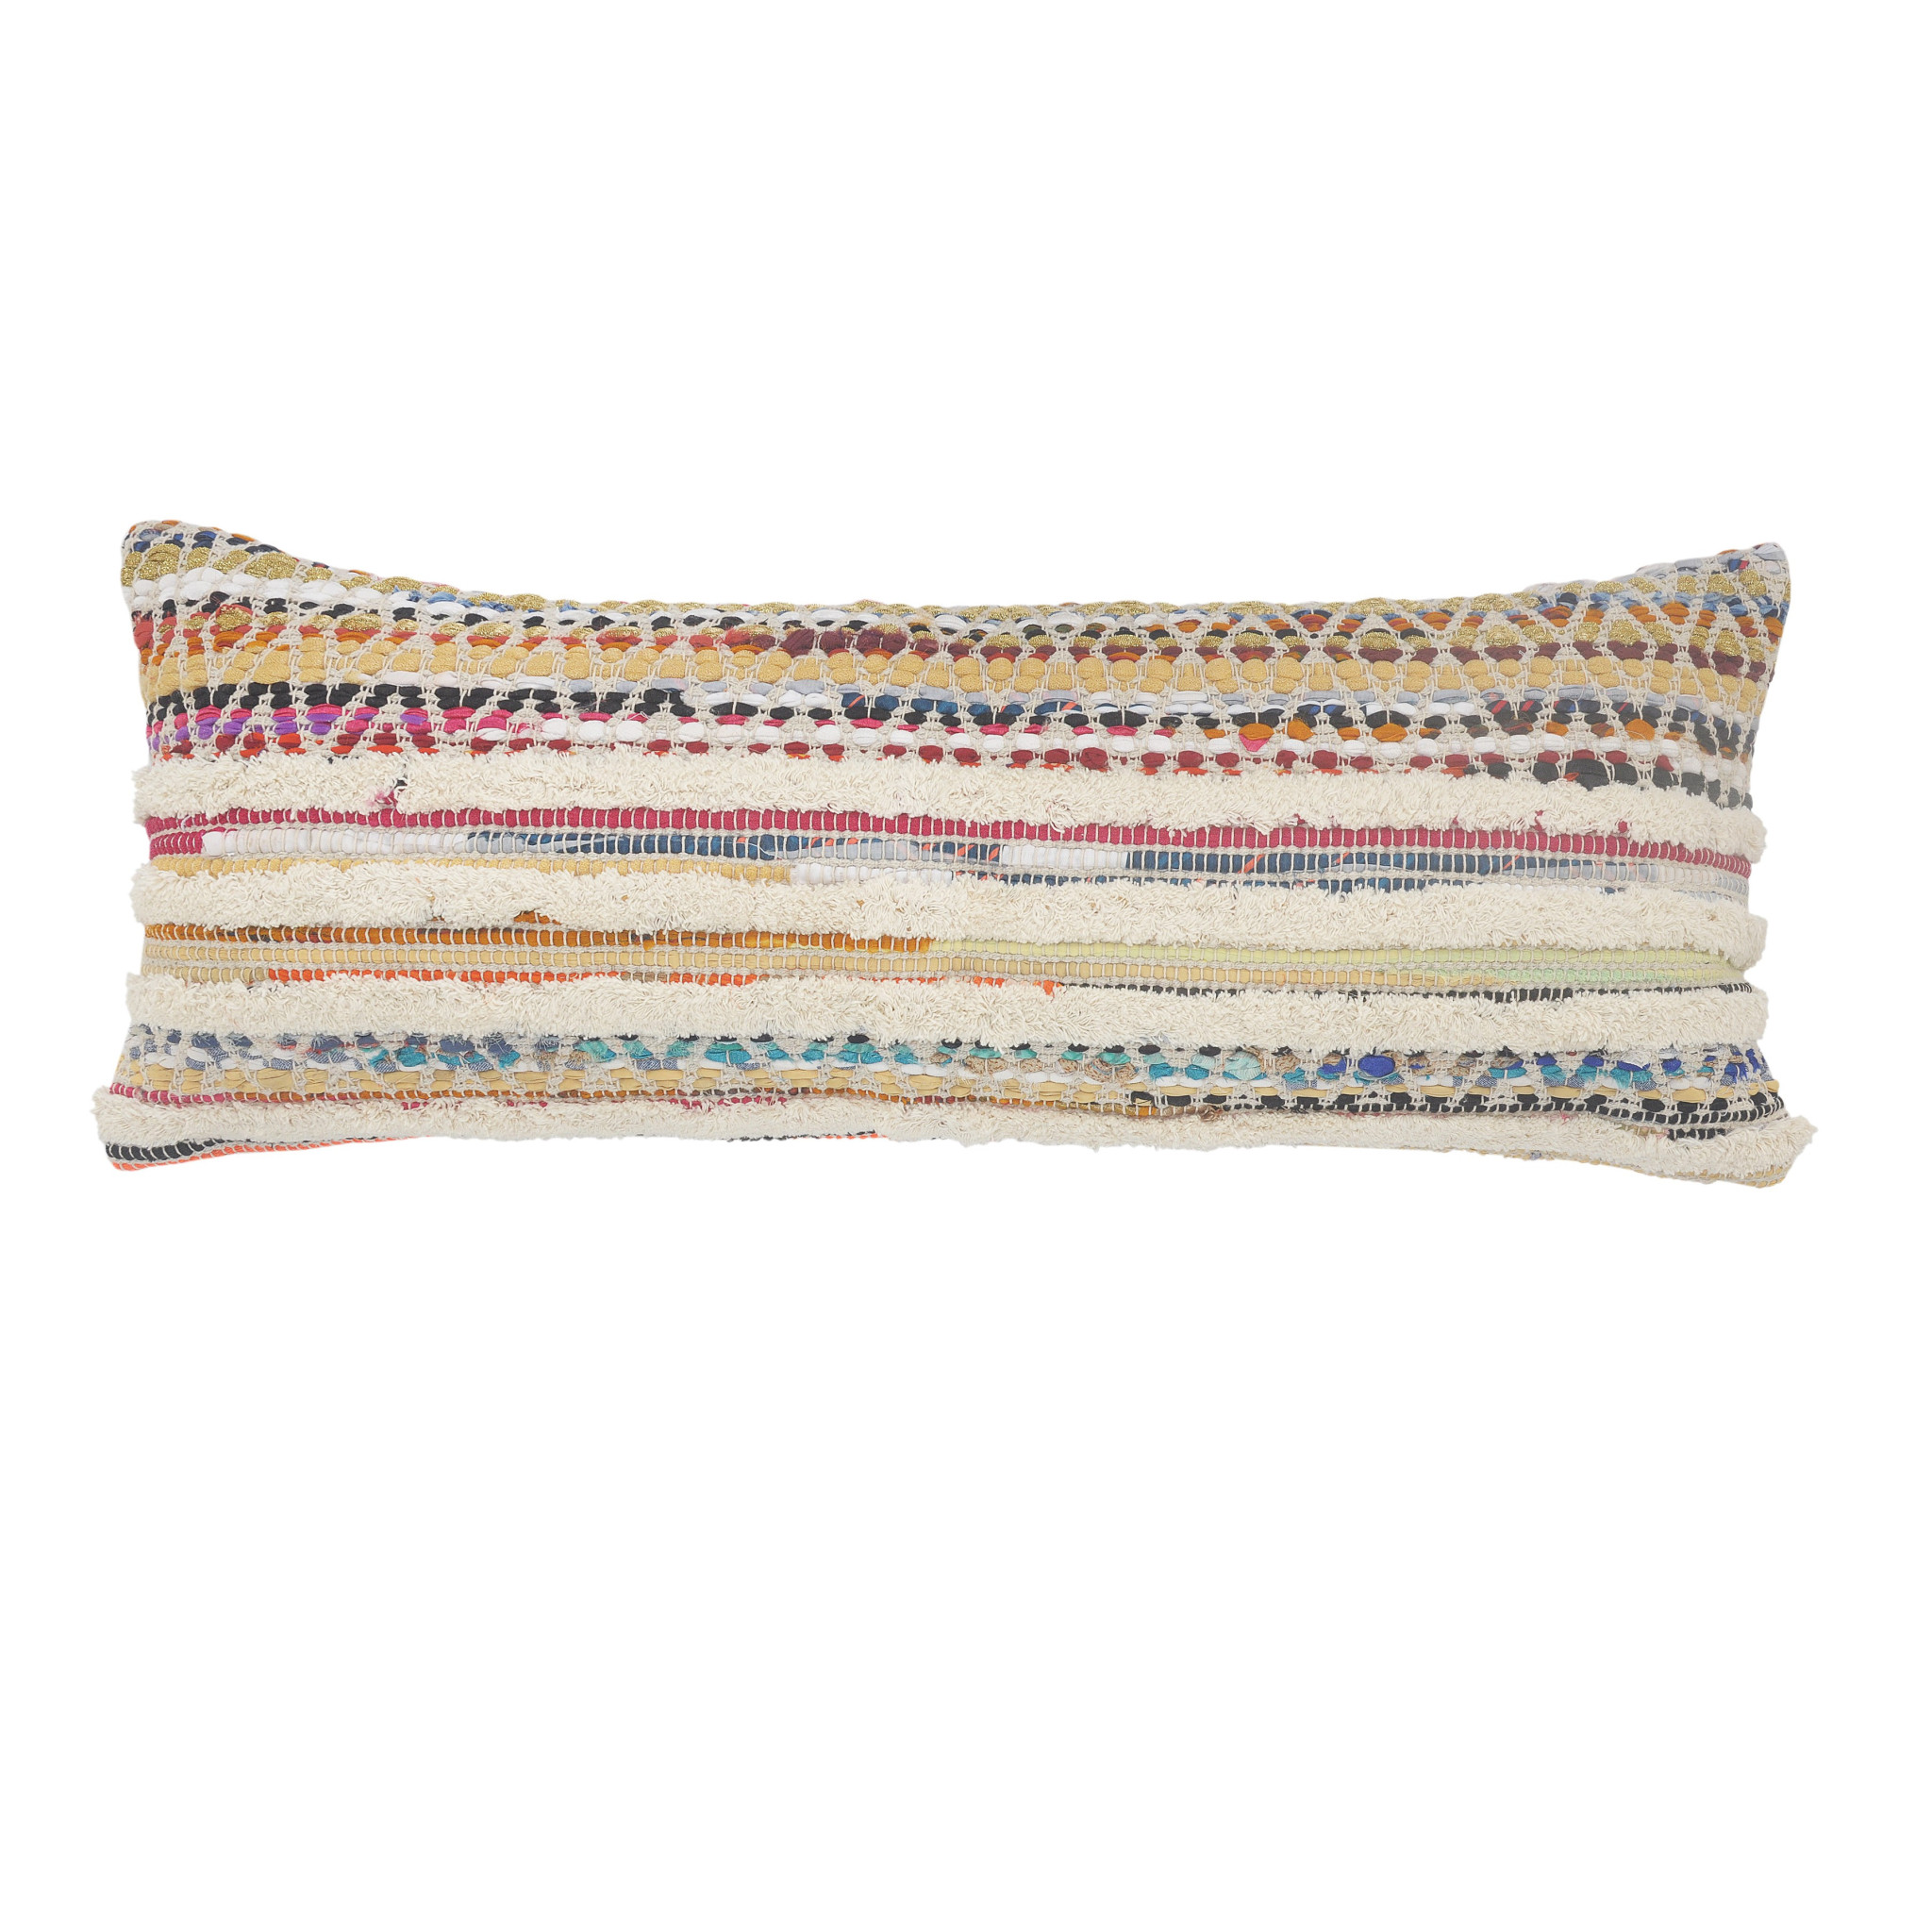 14" X 36" Off-White Red Blue Orange And Green 100% Cotton Striped Zippered Pillow-517280-1